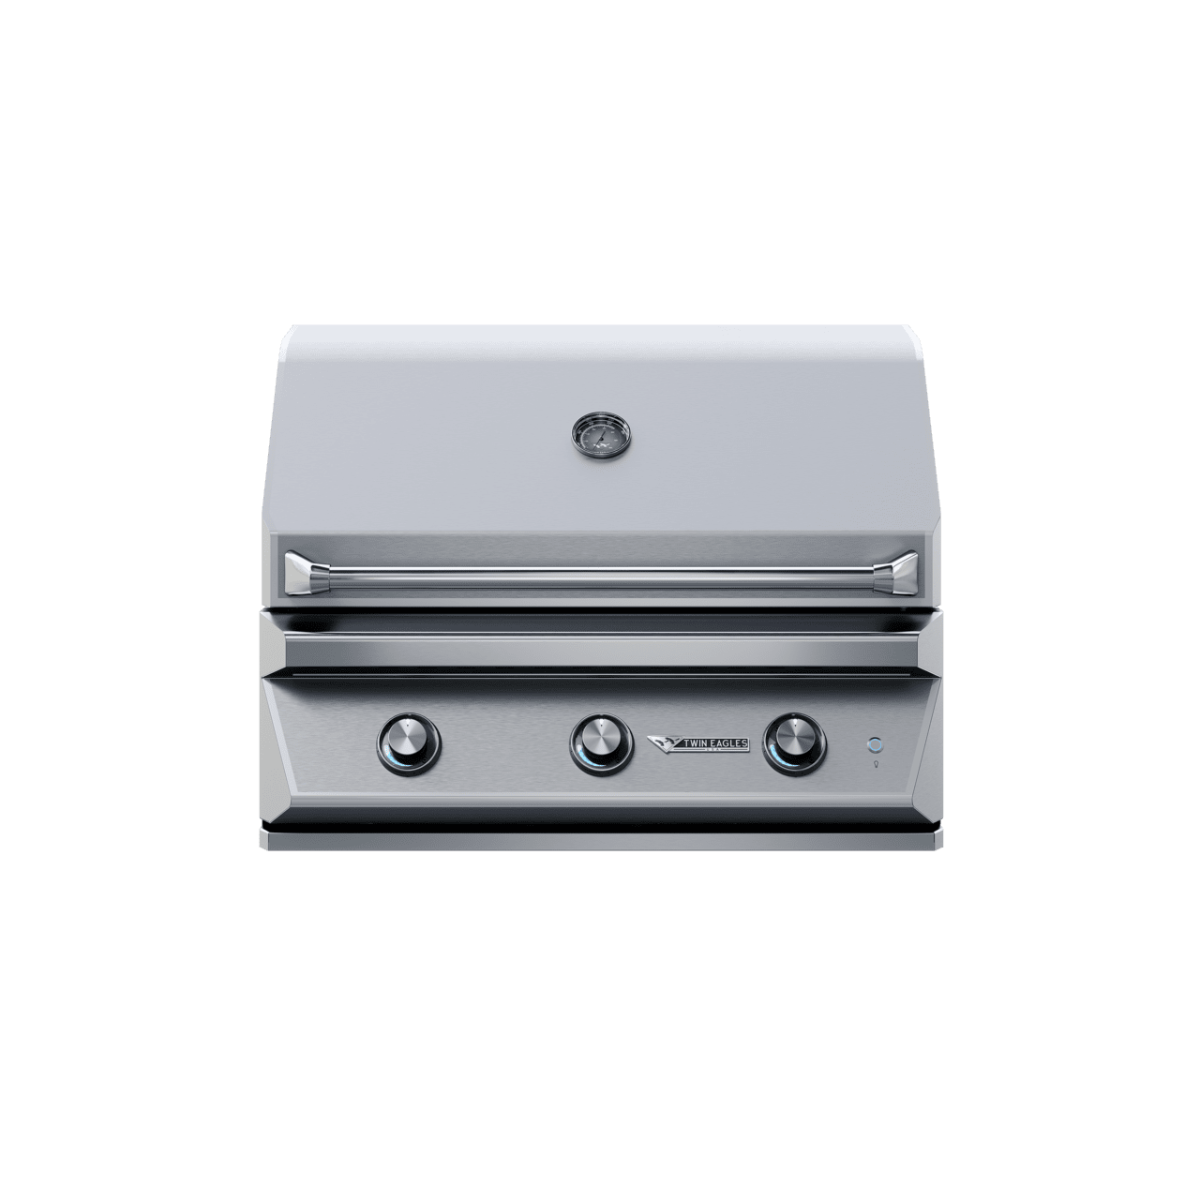 Front view of a 36-inch Twin Eagles gas grill with a closed lid. The stainless steel grill features three control knobs and a temperature gauge on the lid.